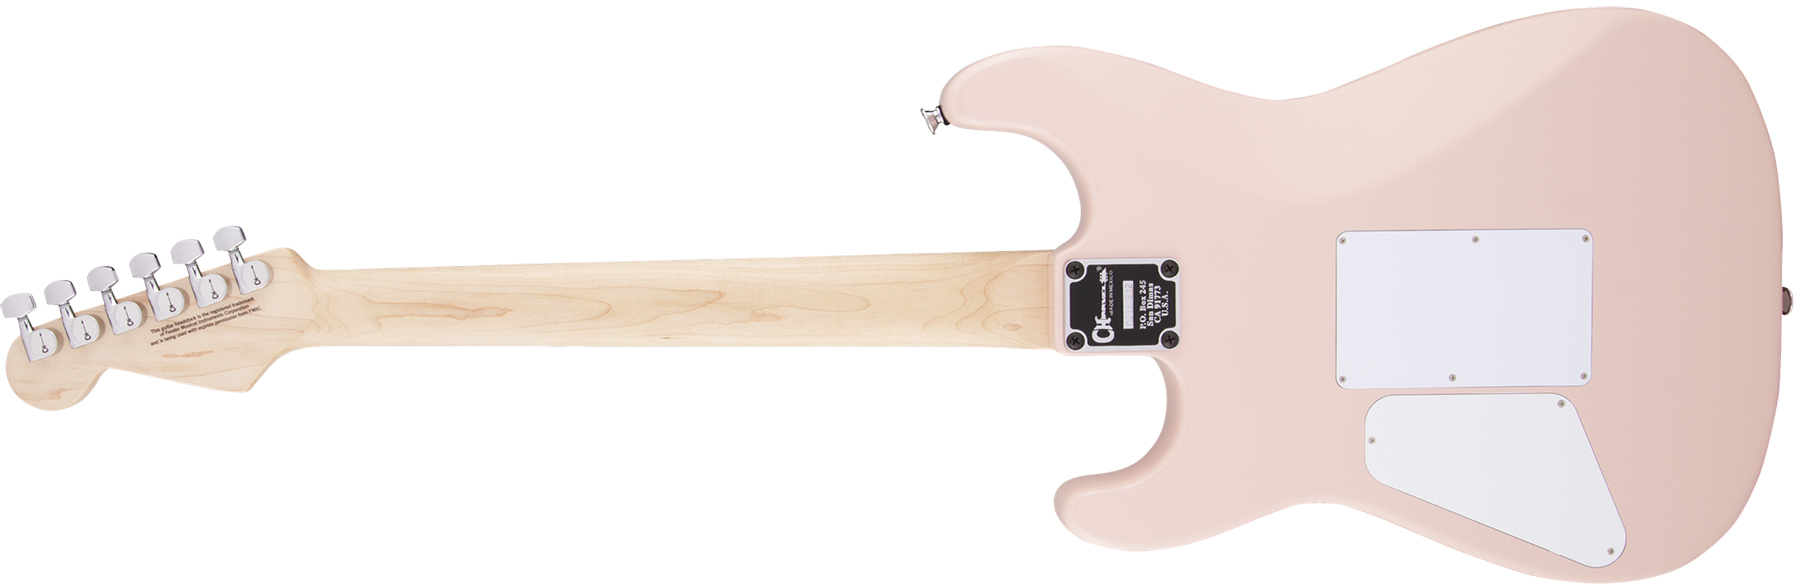 Charvel So-cal Style 1 Hh  Fr M Pro-mod 2h Seymour Duncan Mn - Satin Shell Pink - Str shape electric guitar - Variation 1